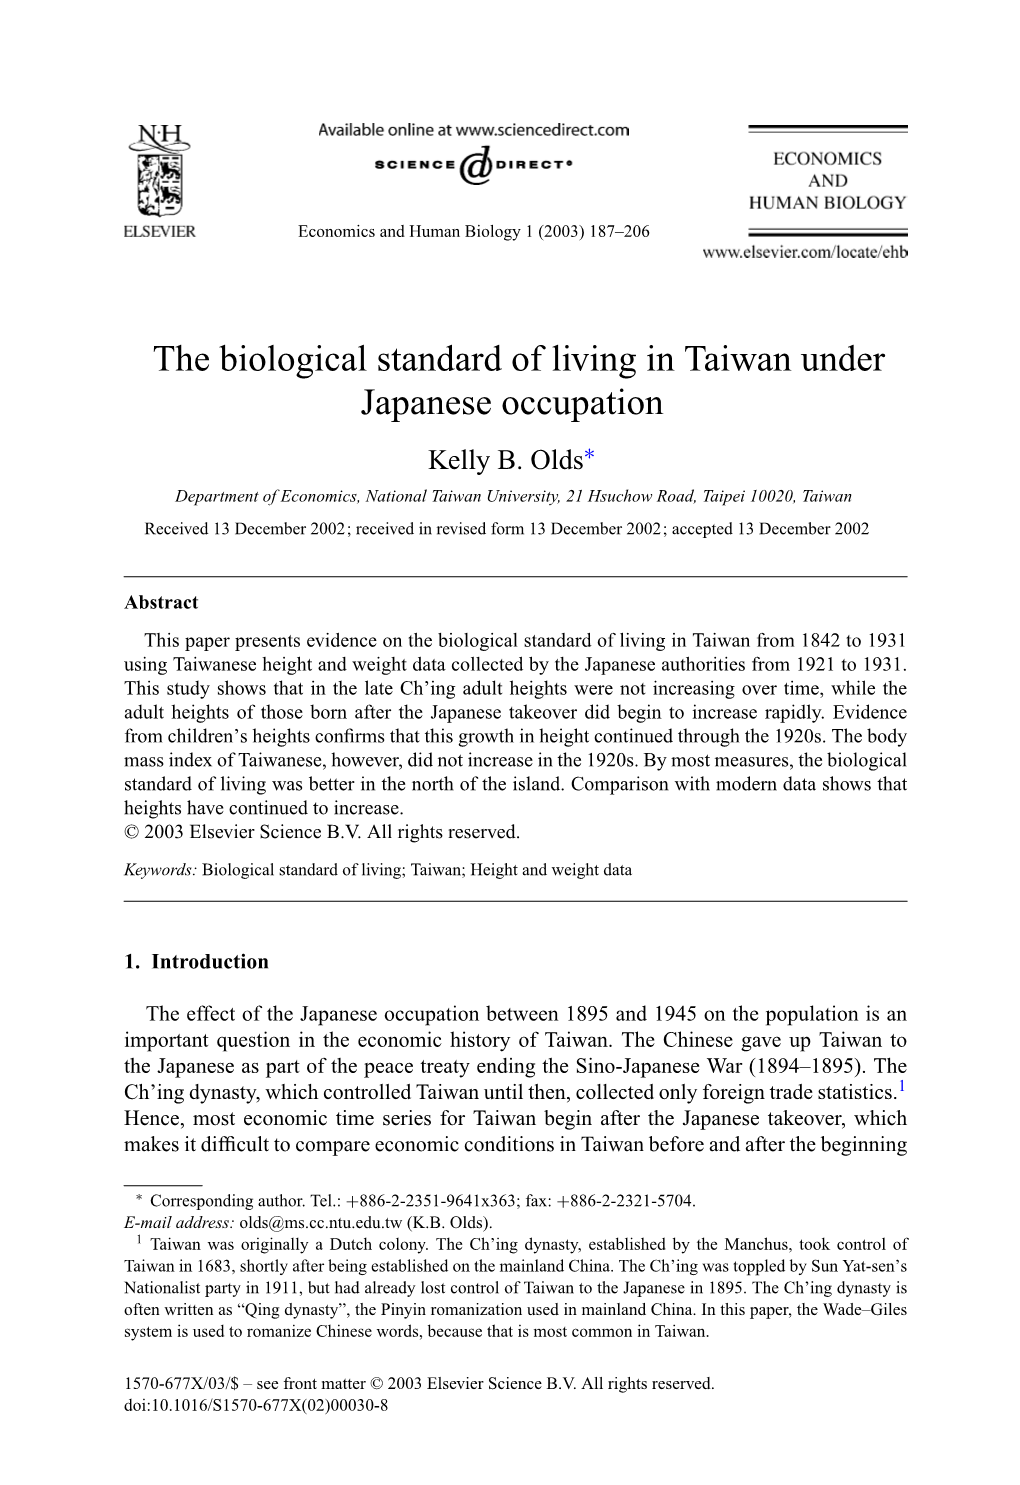 The Biological Standard of Living in Taiwan Under Japanese Occupation Kelly B